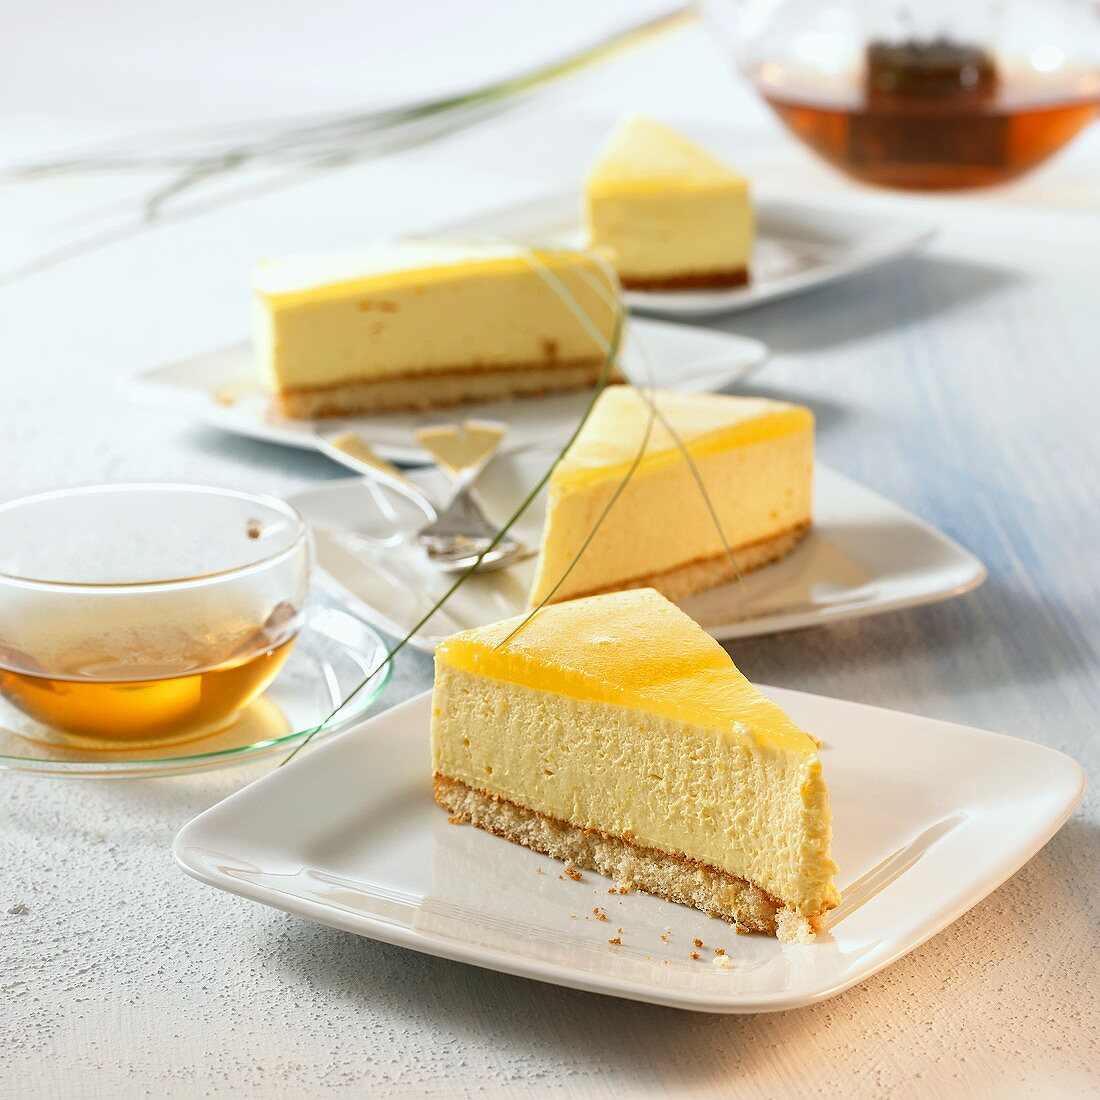 Four pieces of passion fruit cake to serve with tea